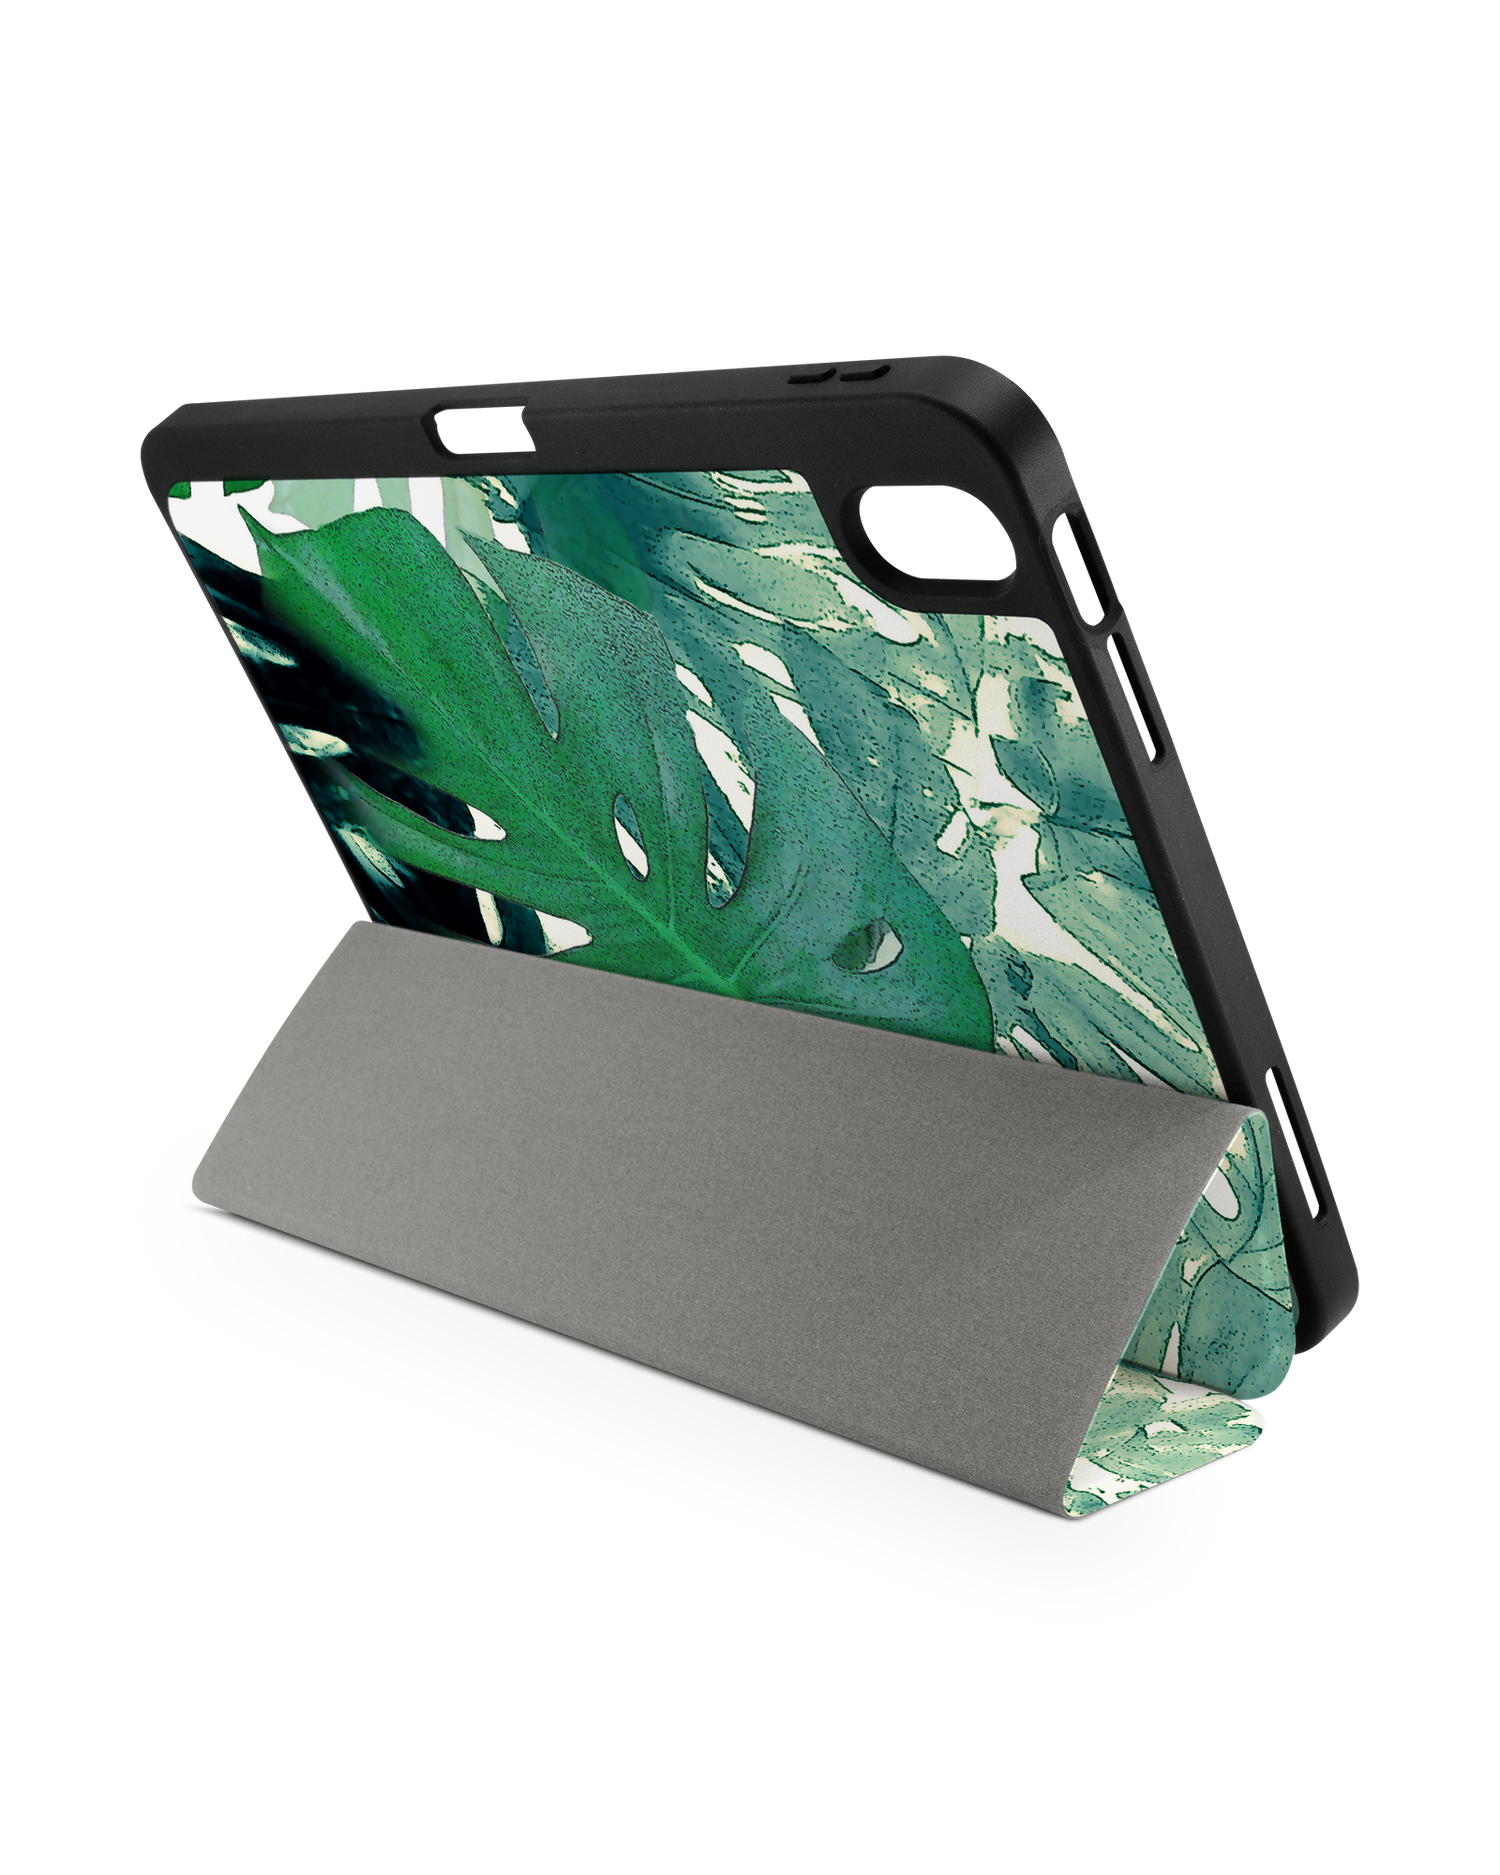 Saturated Plants iPad Case with Pencil Holder for Apple iPad (10th Generation): Set up in landscape format (back view)